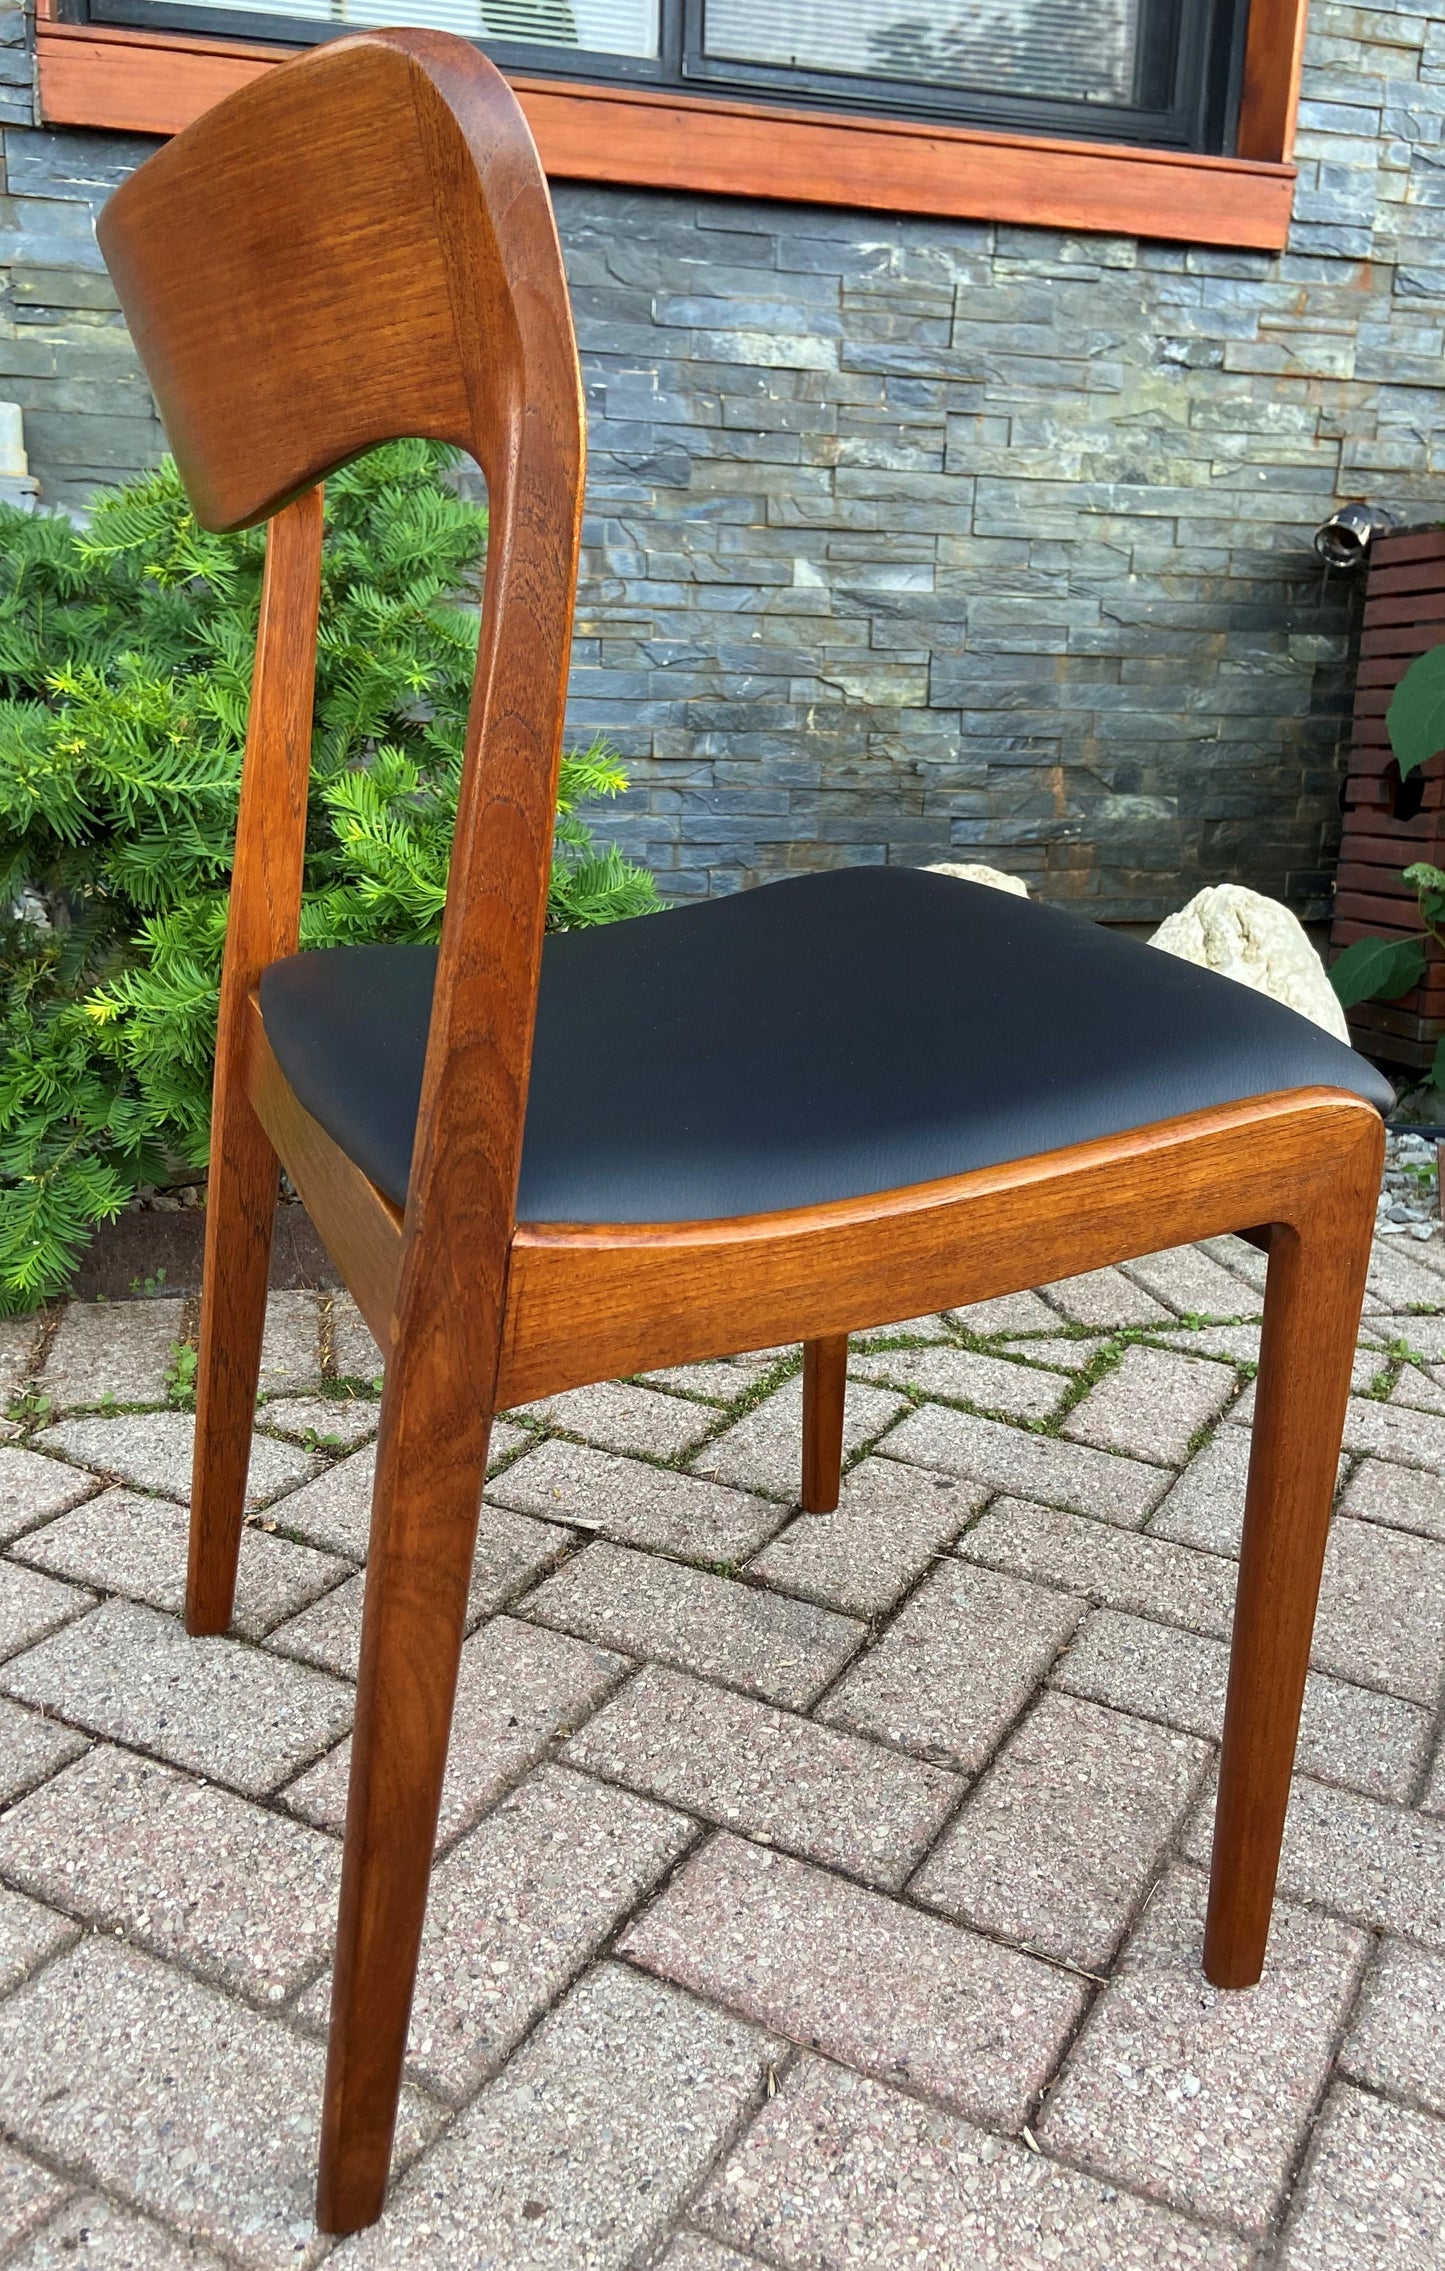 Single REFINISHED REUPHOLSTERED Danish Mid Century Modern Teak Chair, Moller style